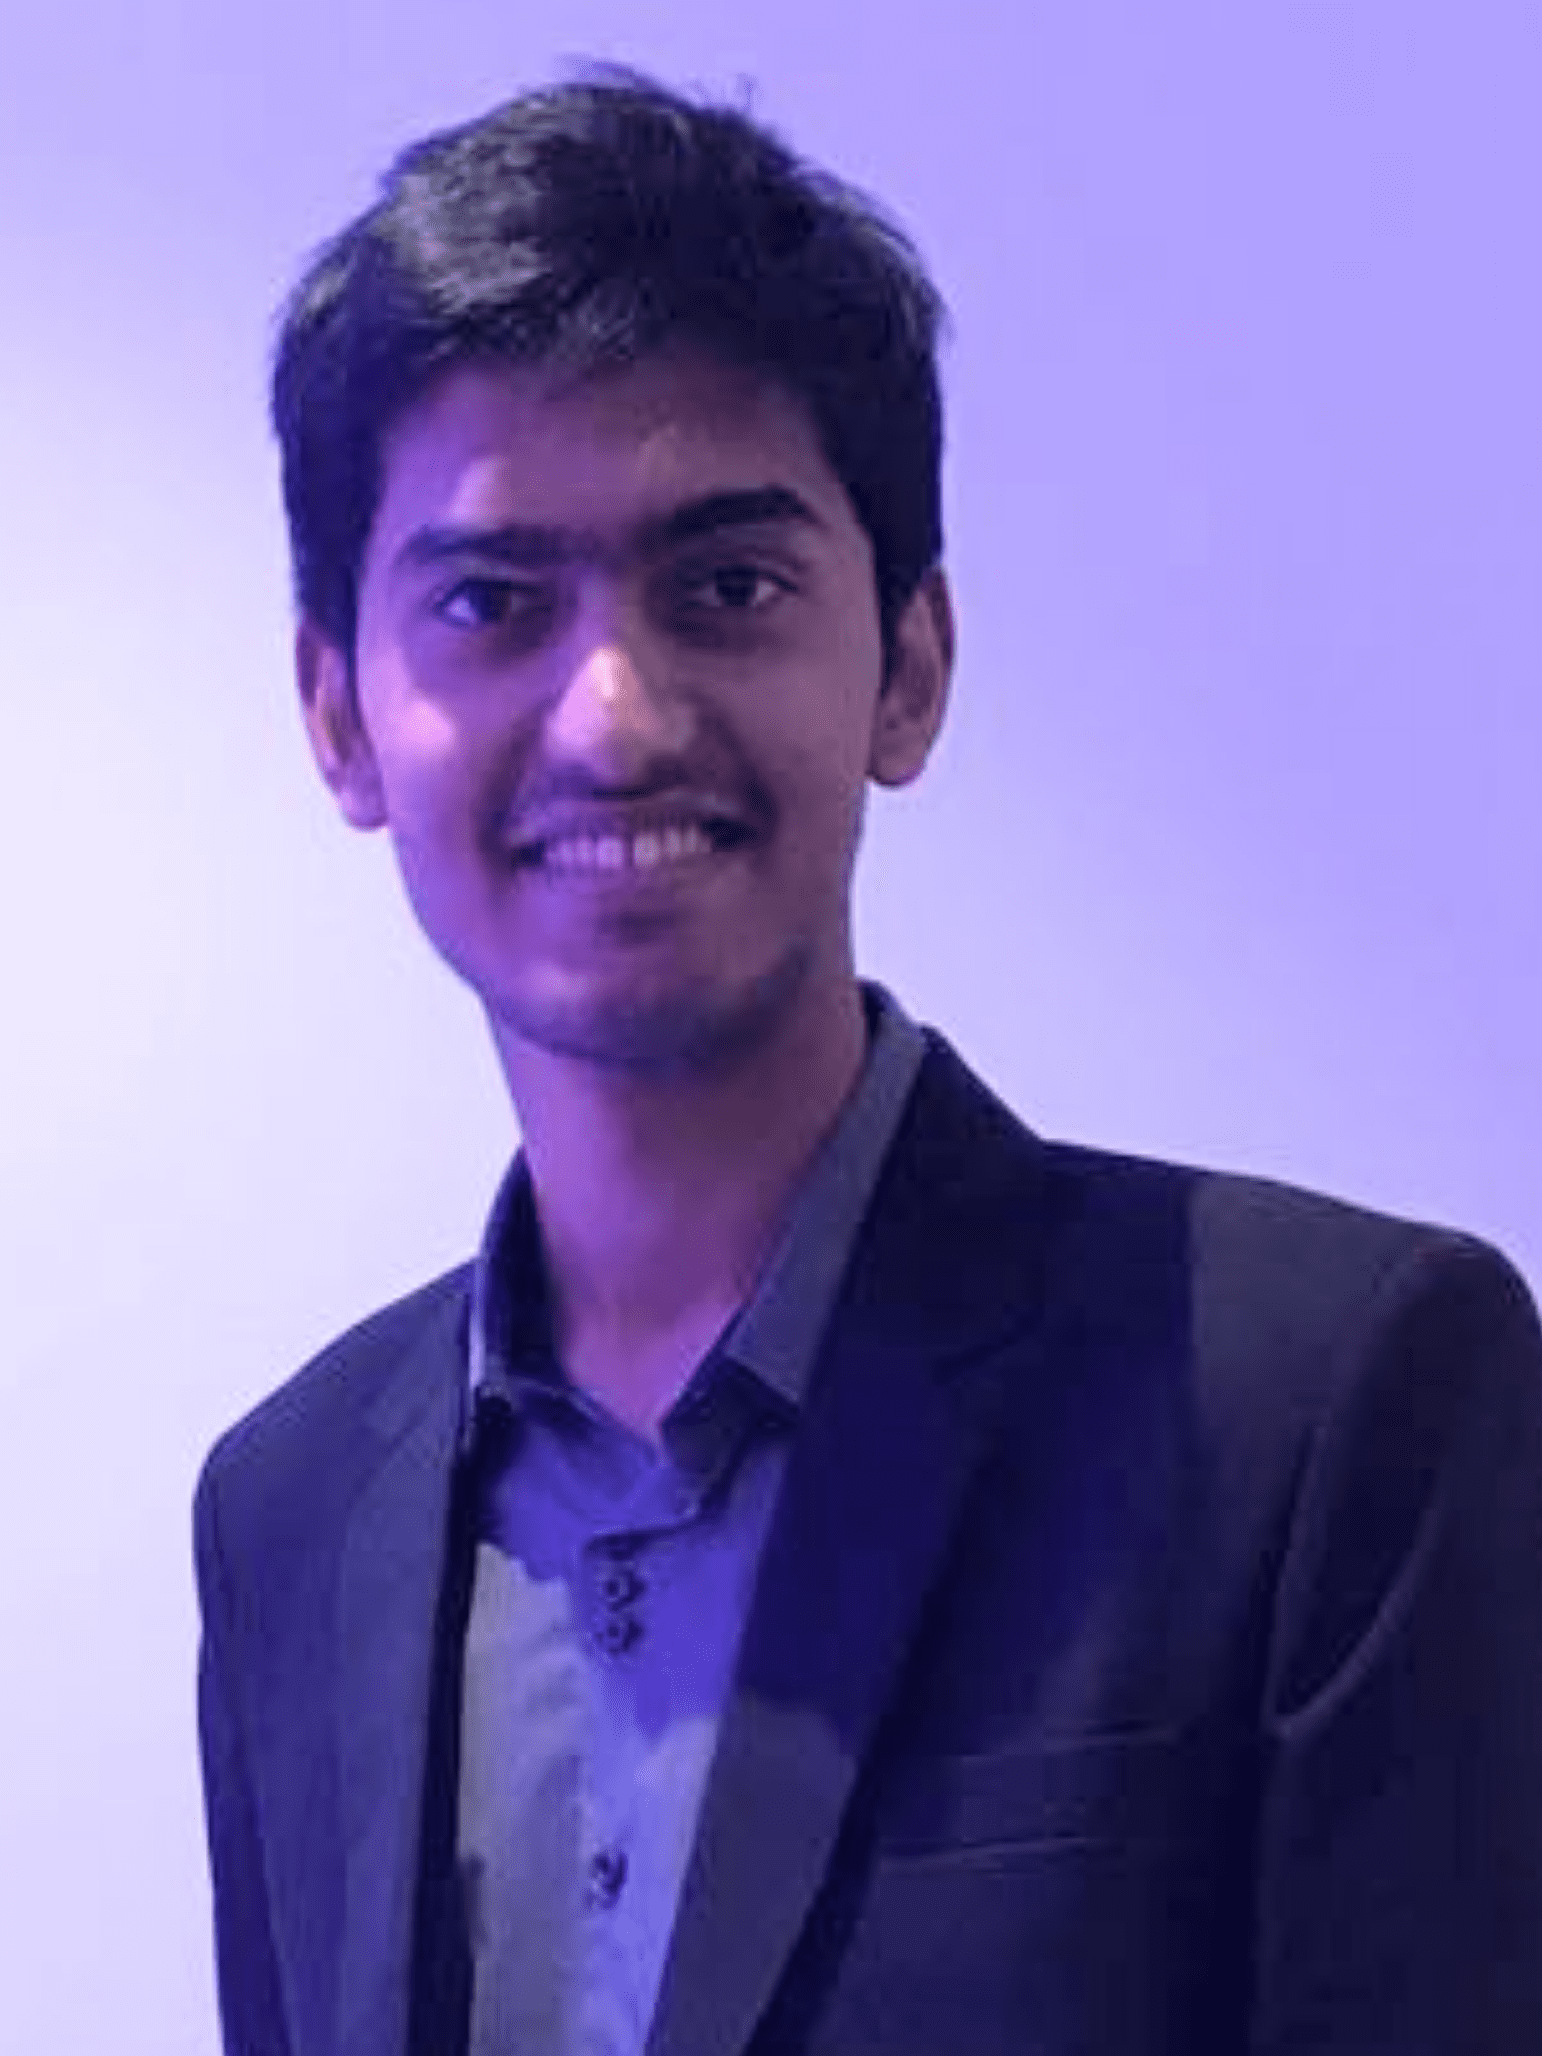 Rishit facing the camera with a smile wearing a black blazer and a grey shirt. Image has a plain background and a shade of purple because of the lights.